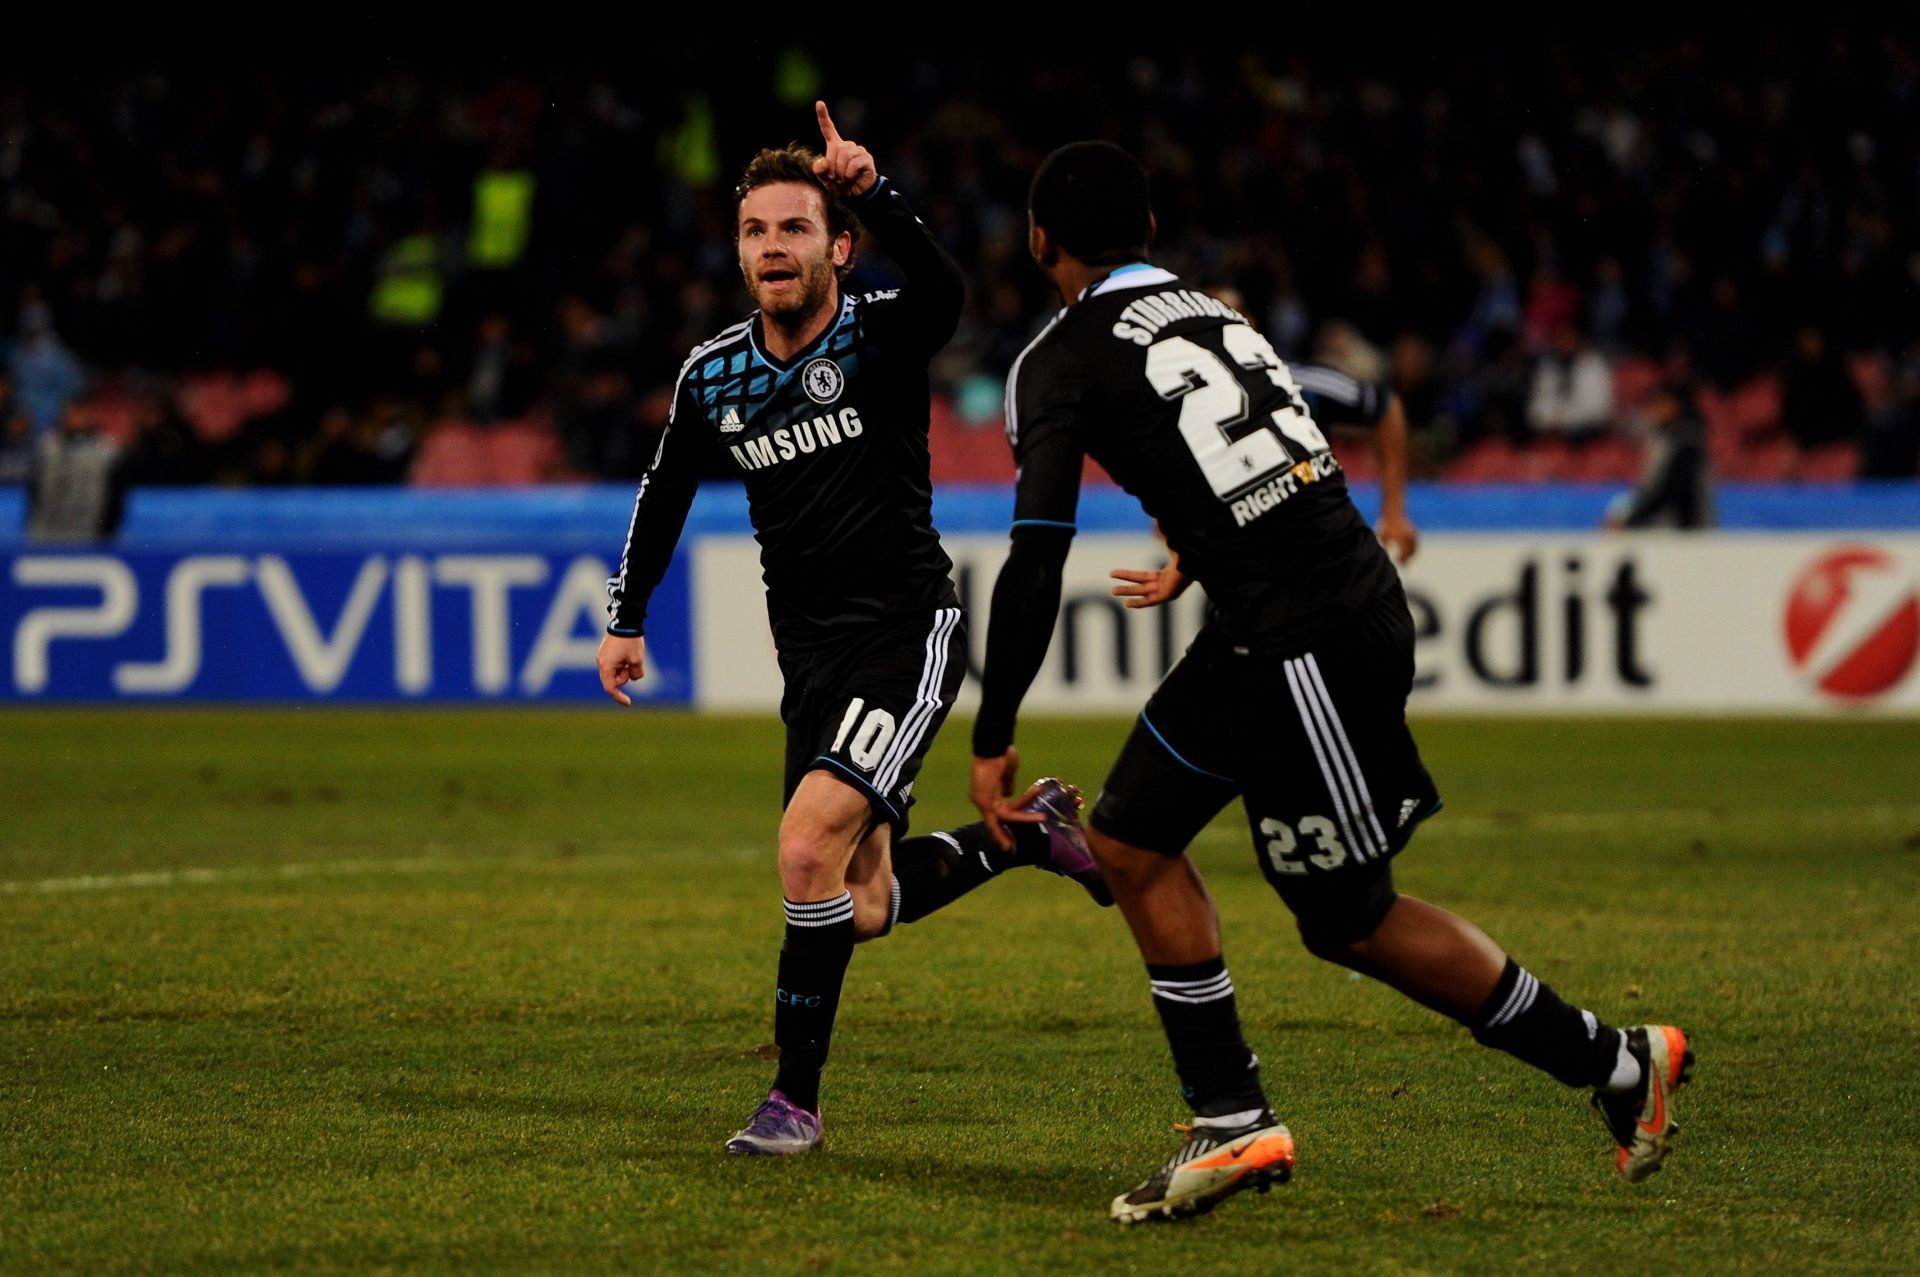 Juan Mata won the UEFA Champions League with Chelsea in 2012